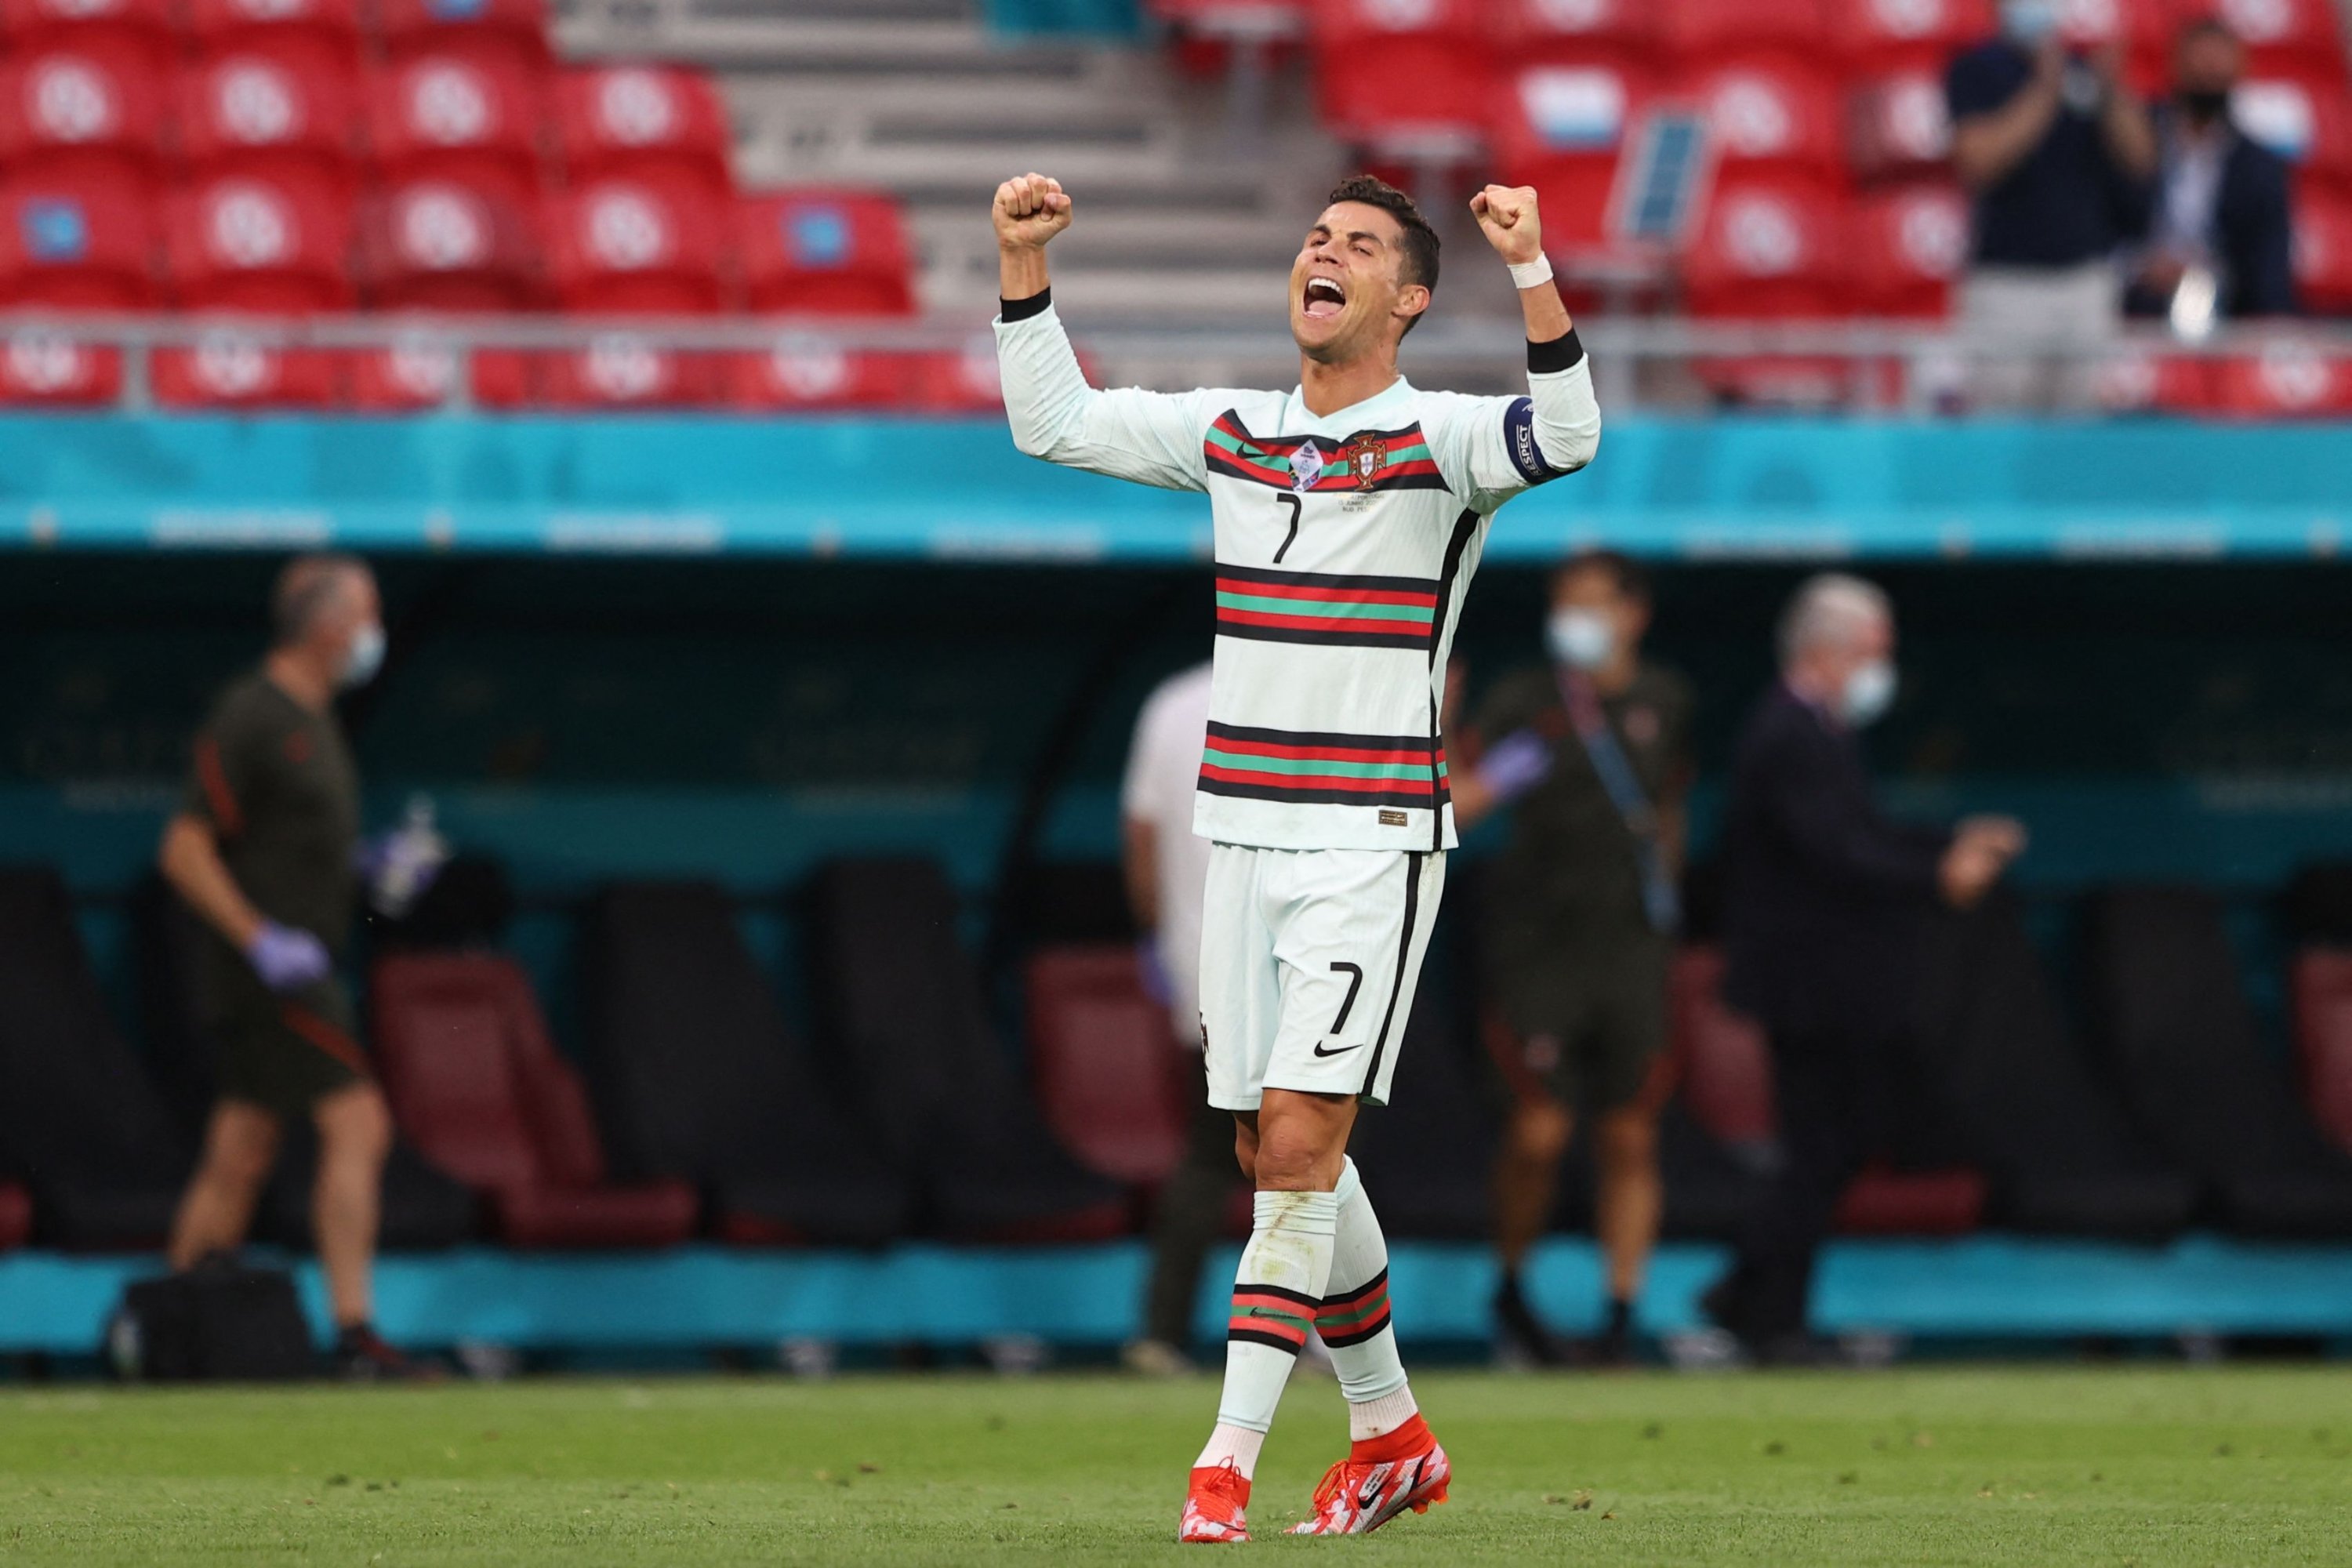 Ronaldo rules Euro 2020 with two more games to go for Portugal | Daily Sabah